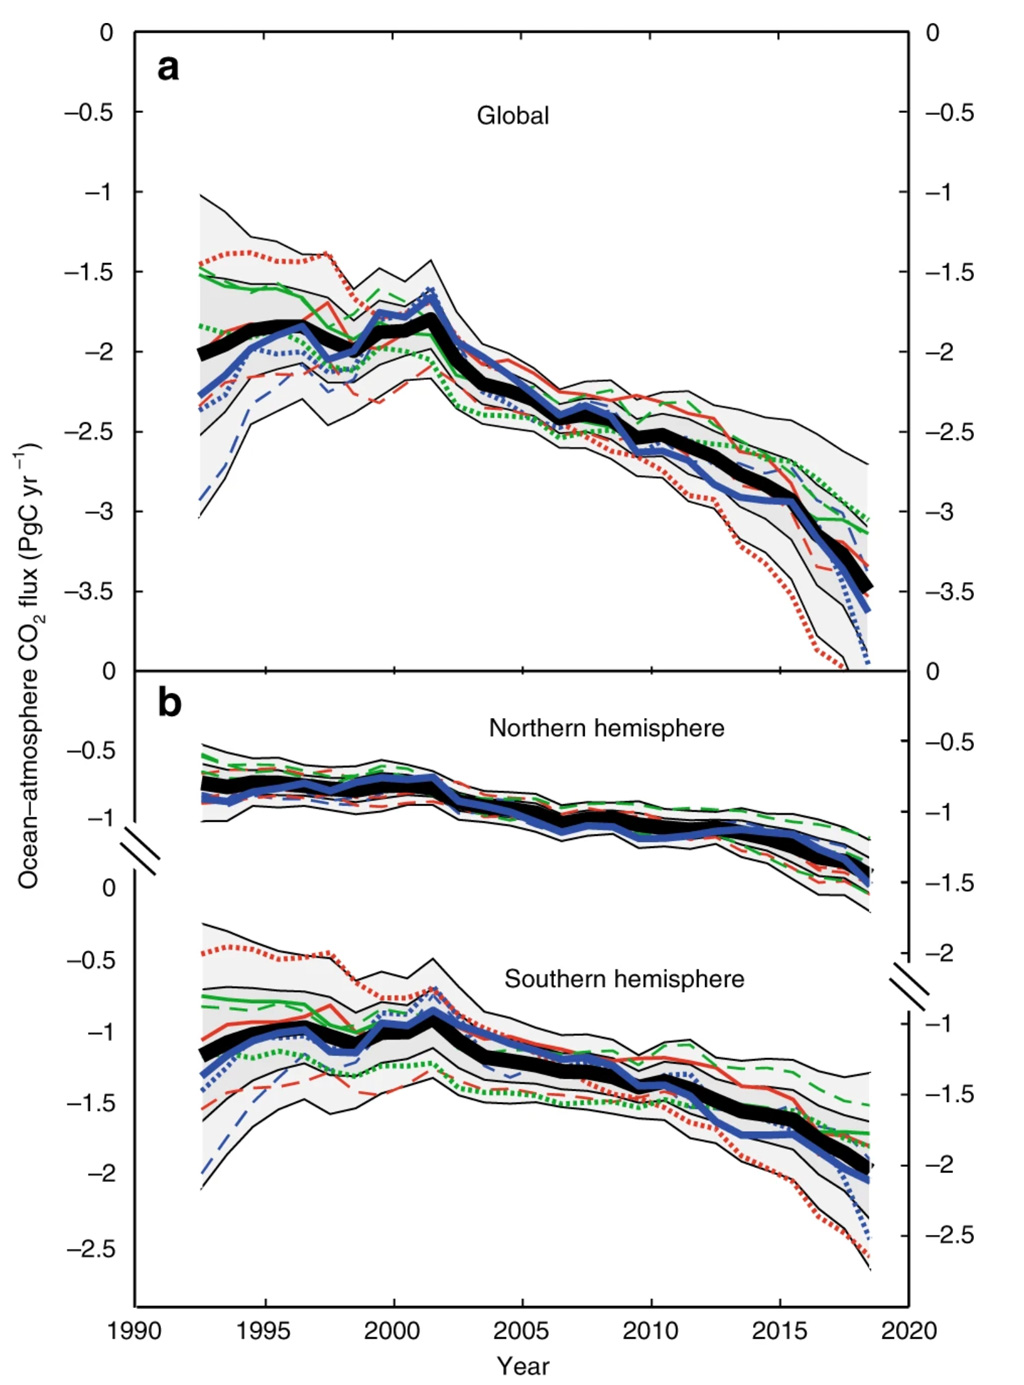 Charts show atmosphere-ocean CO2 exchange for a) the globe, and b) for northern and southern hemispheres for 1992-2018. The coloured lines show nine different interpolation schemes for CO2 exchange, and the shading indicates one- and two-standard deviations of the nine methods around the mean (thick black line).